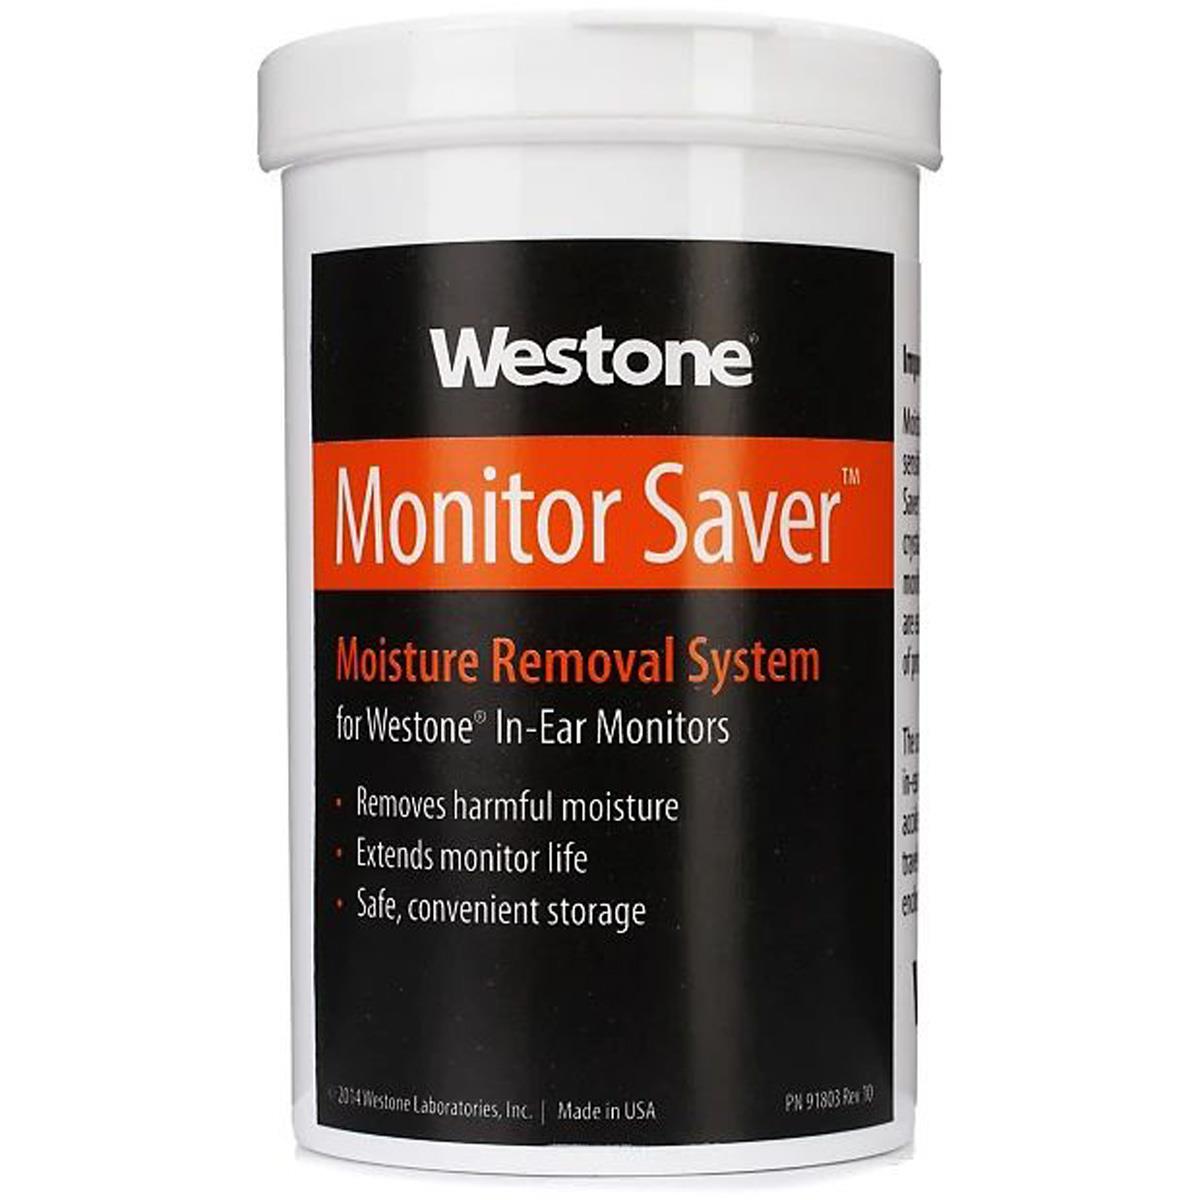 Image of Westone Monitor Saver Moisture Removal System